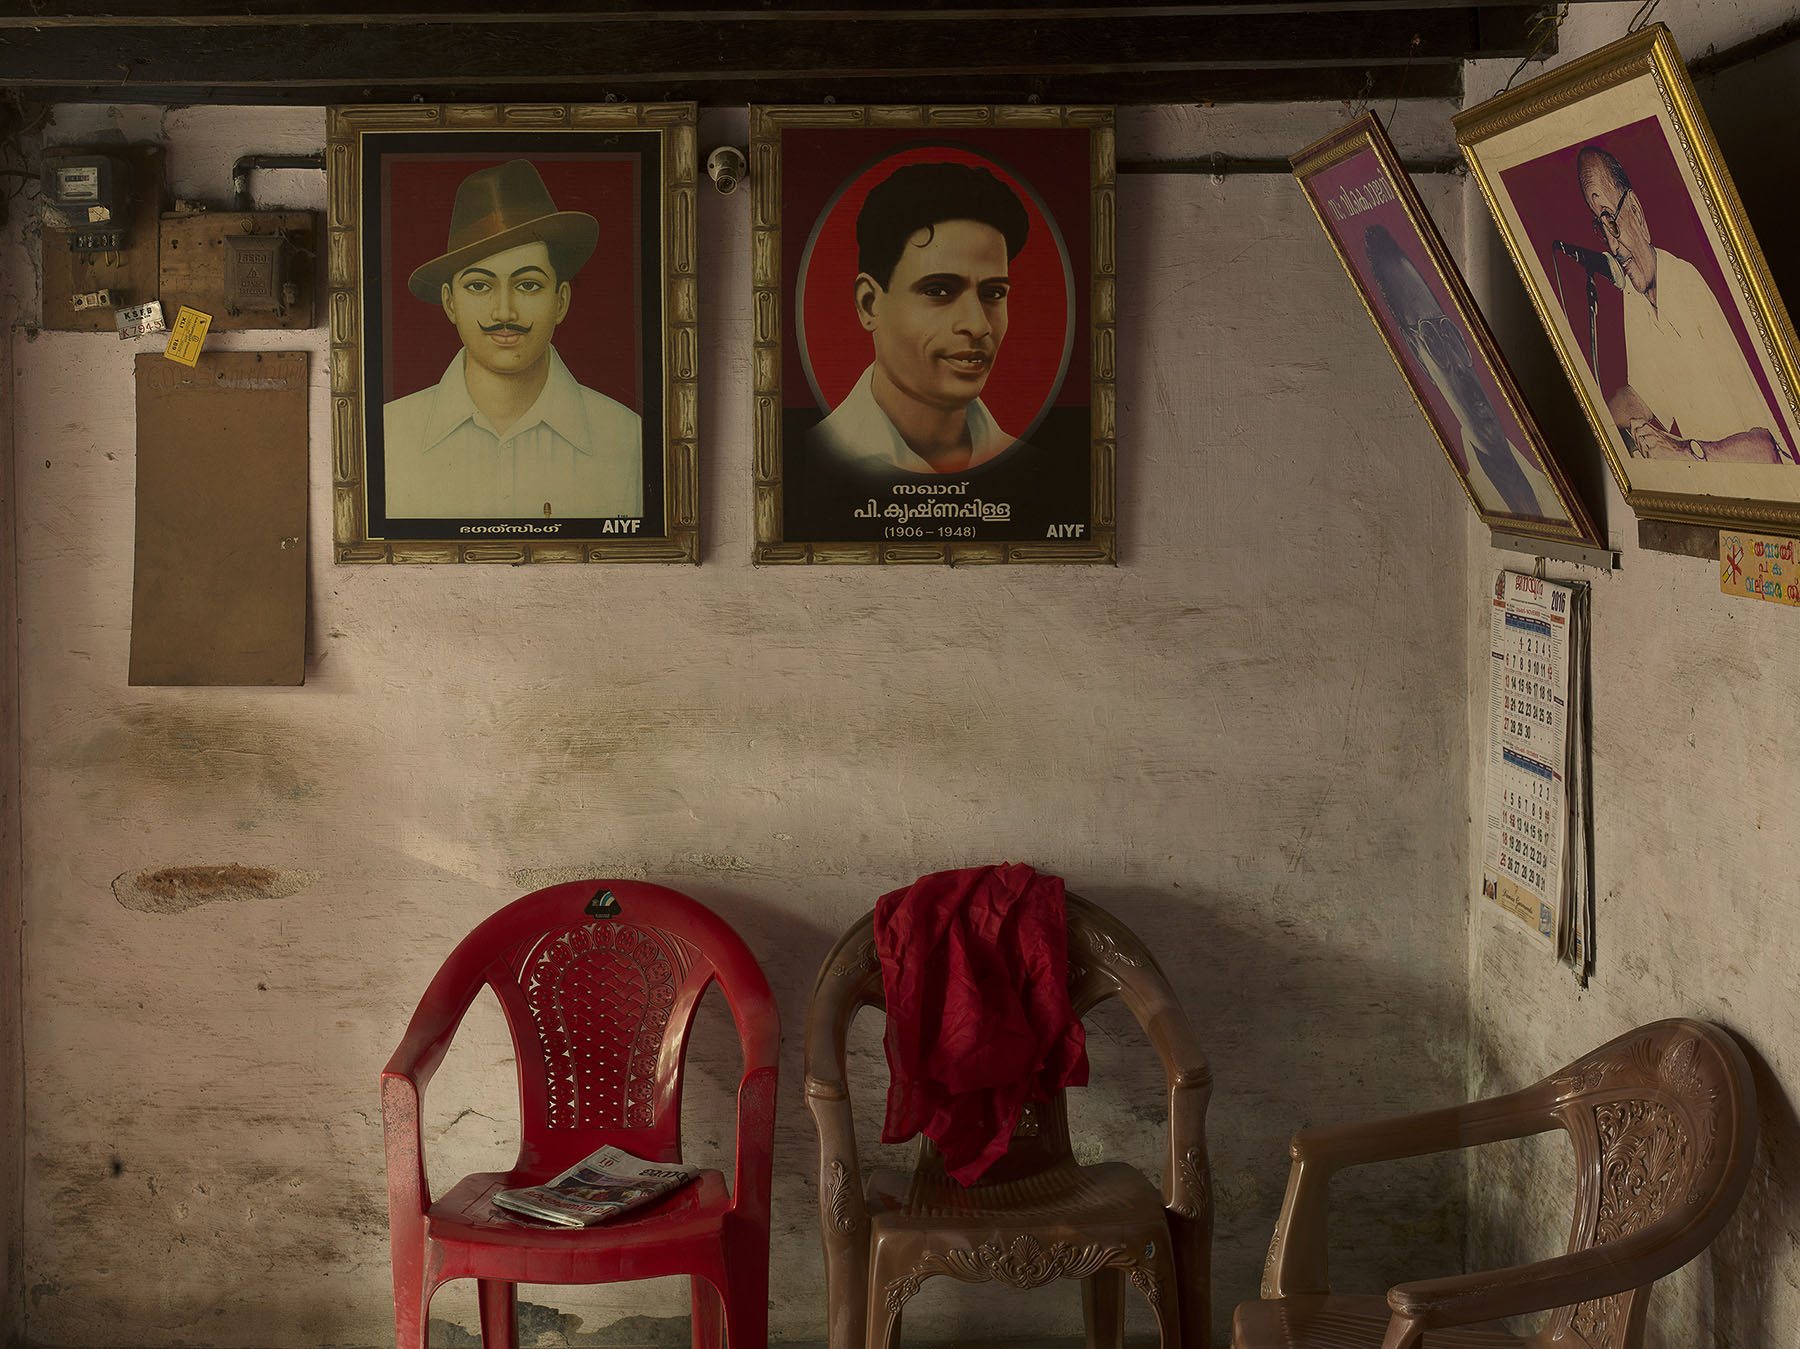 Communism in India – Kerala. Communist Party of India, aka CPI: Methala village committee office, Thrissur district.
Portraits on the back wall: left, socialist revolutionary Bhagat Singh, hanged by the British in 1931, aged 23, for shooting a police officer; right, P. Krishna Pillai, poet and founder of Kerala’s communist movement, who died of a snake bite in 1948 aged 42.
The CPI is the second largest party in the Left Democratic Front coalition which has ruled Kerala State since 2016.